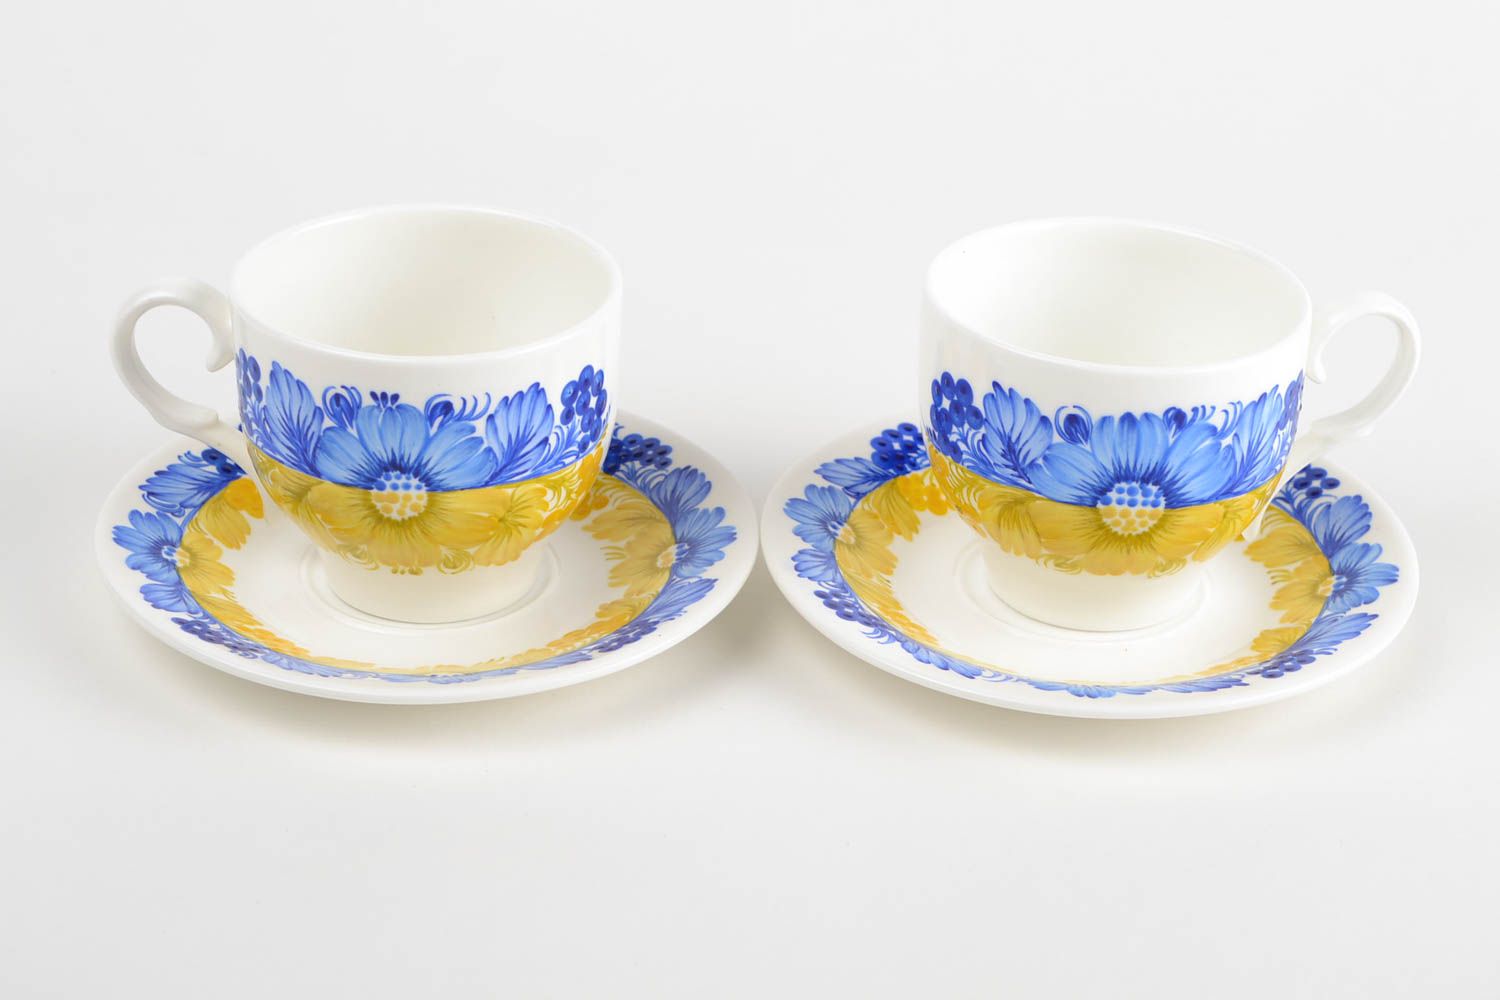 Set of 2 two teacups in white, blue, and yellow colors with saucers photo 5